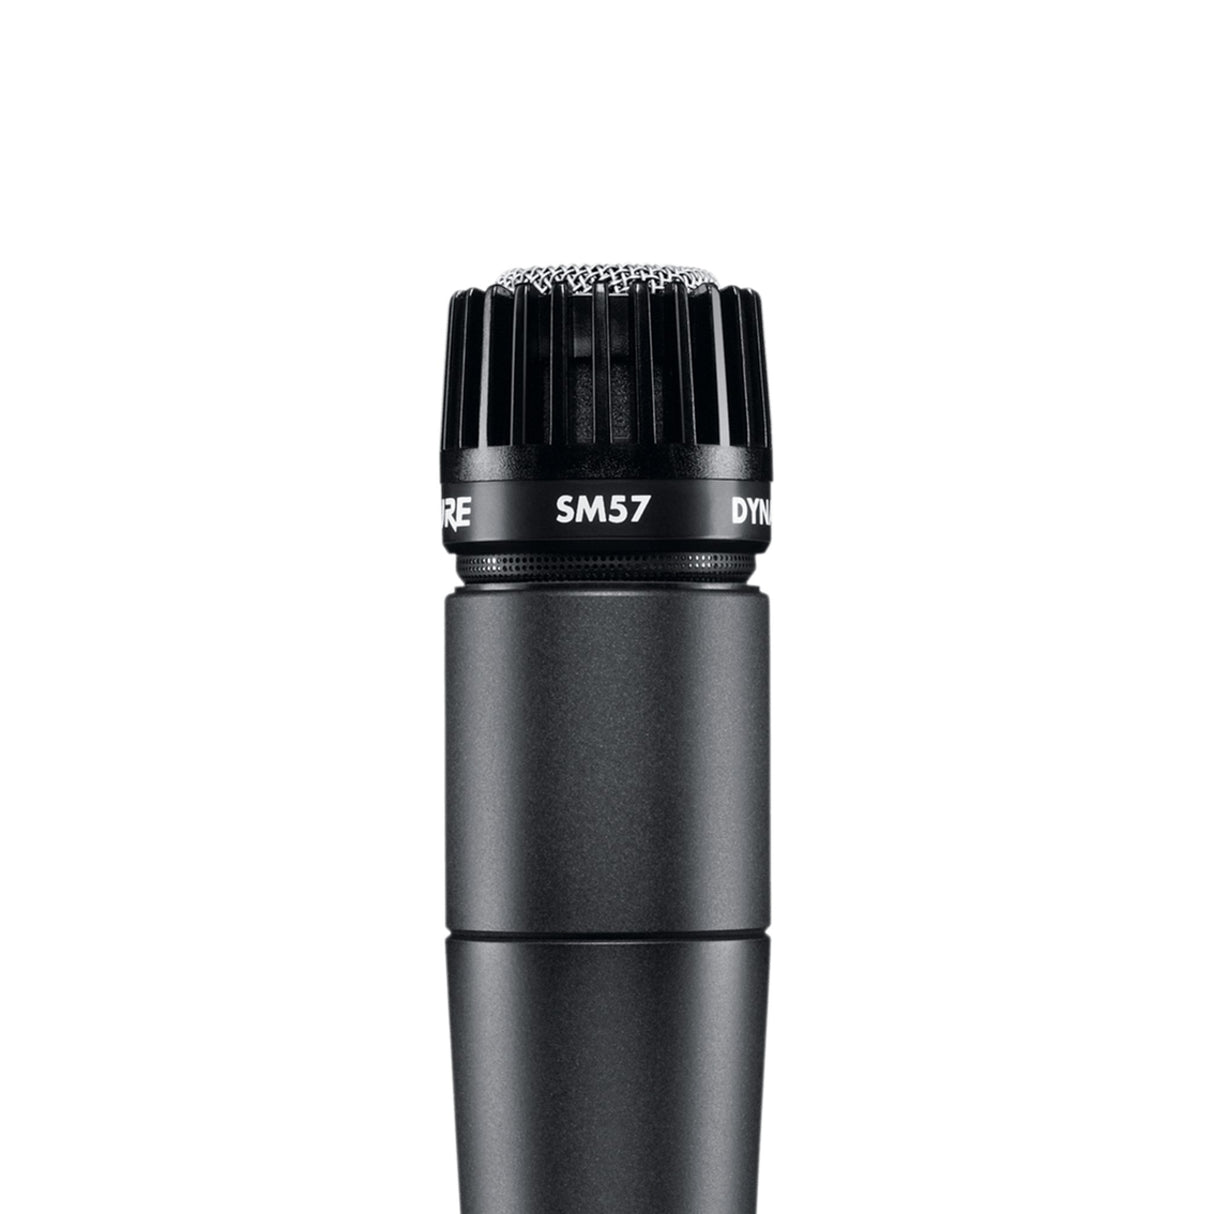 Shure SM57 Dynamic Instrumental and Vocal Microphone